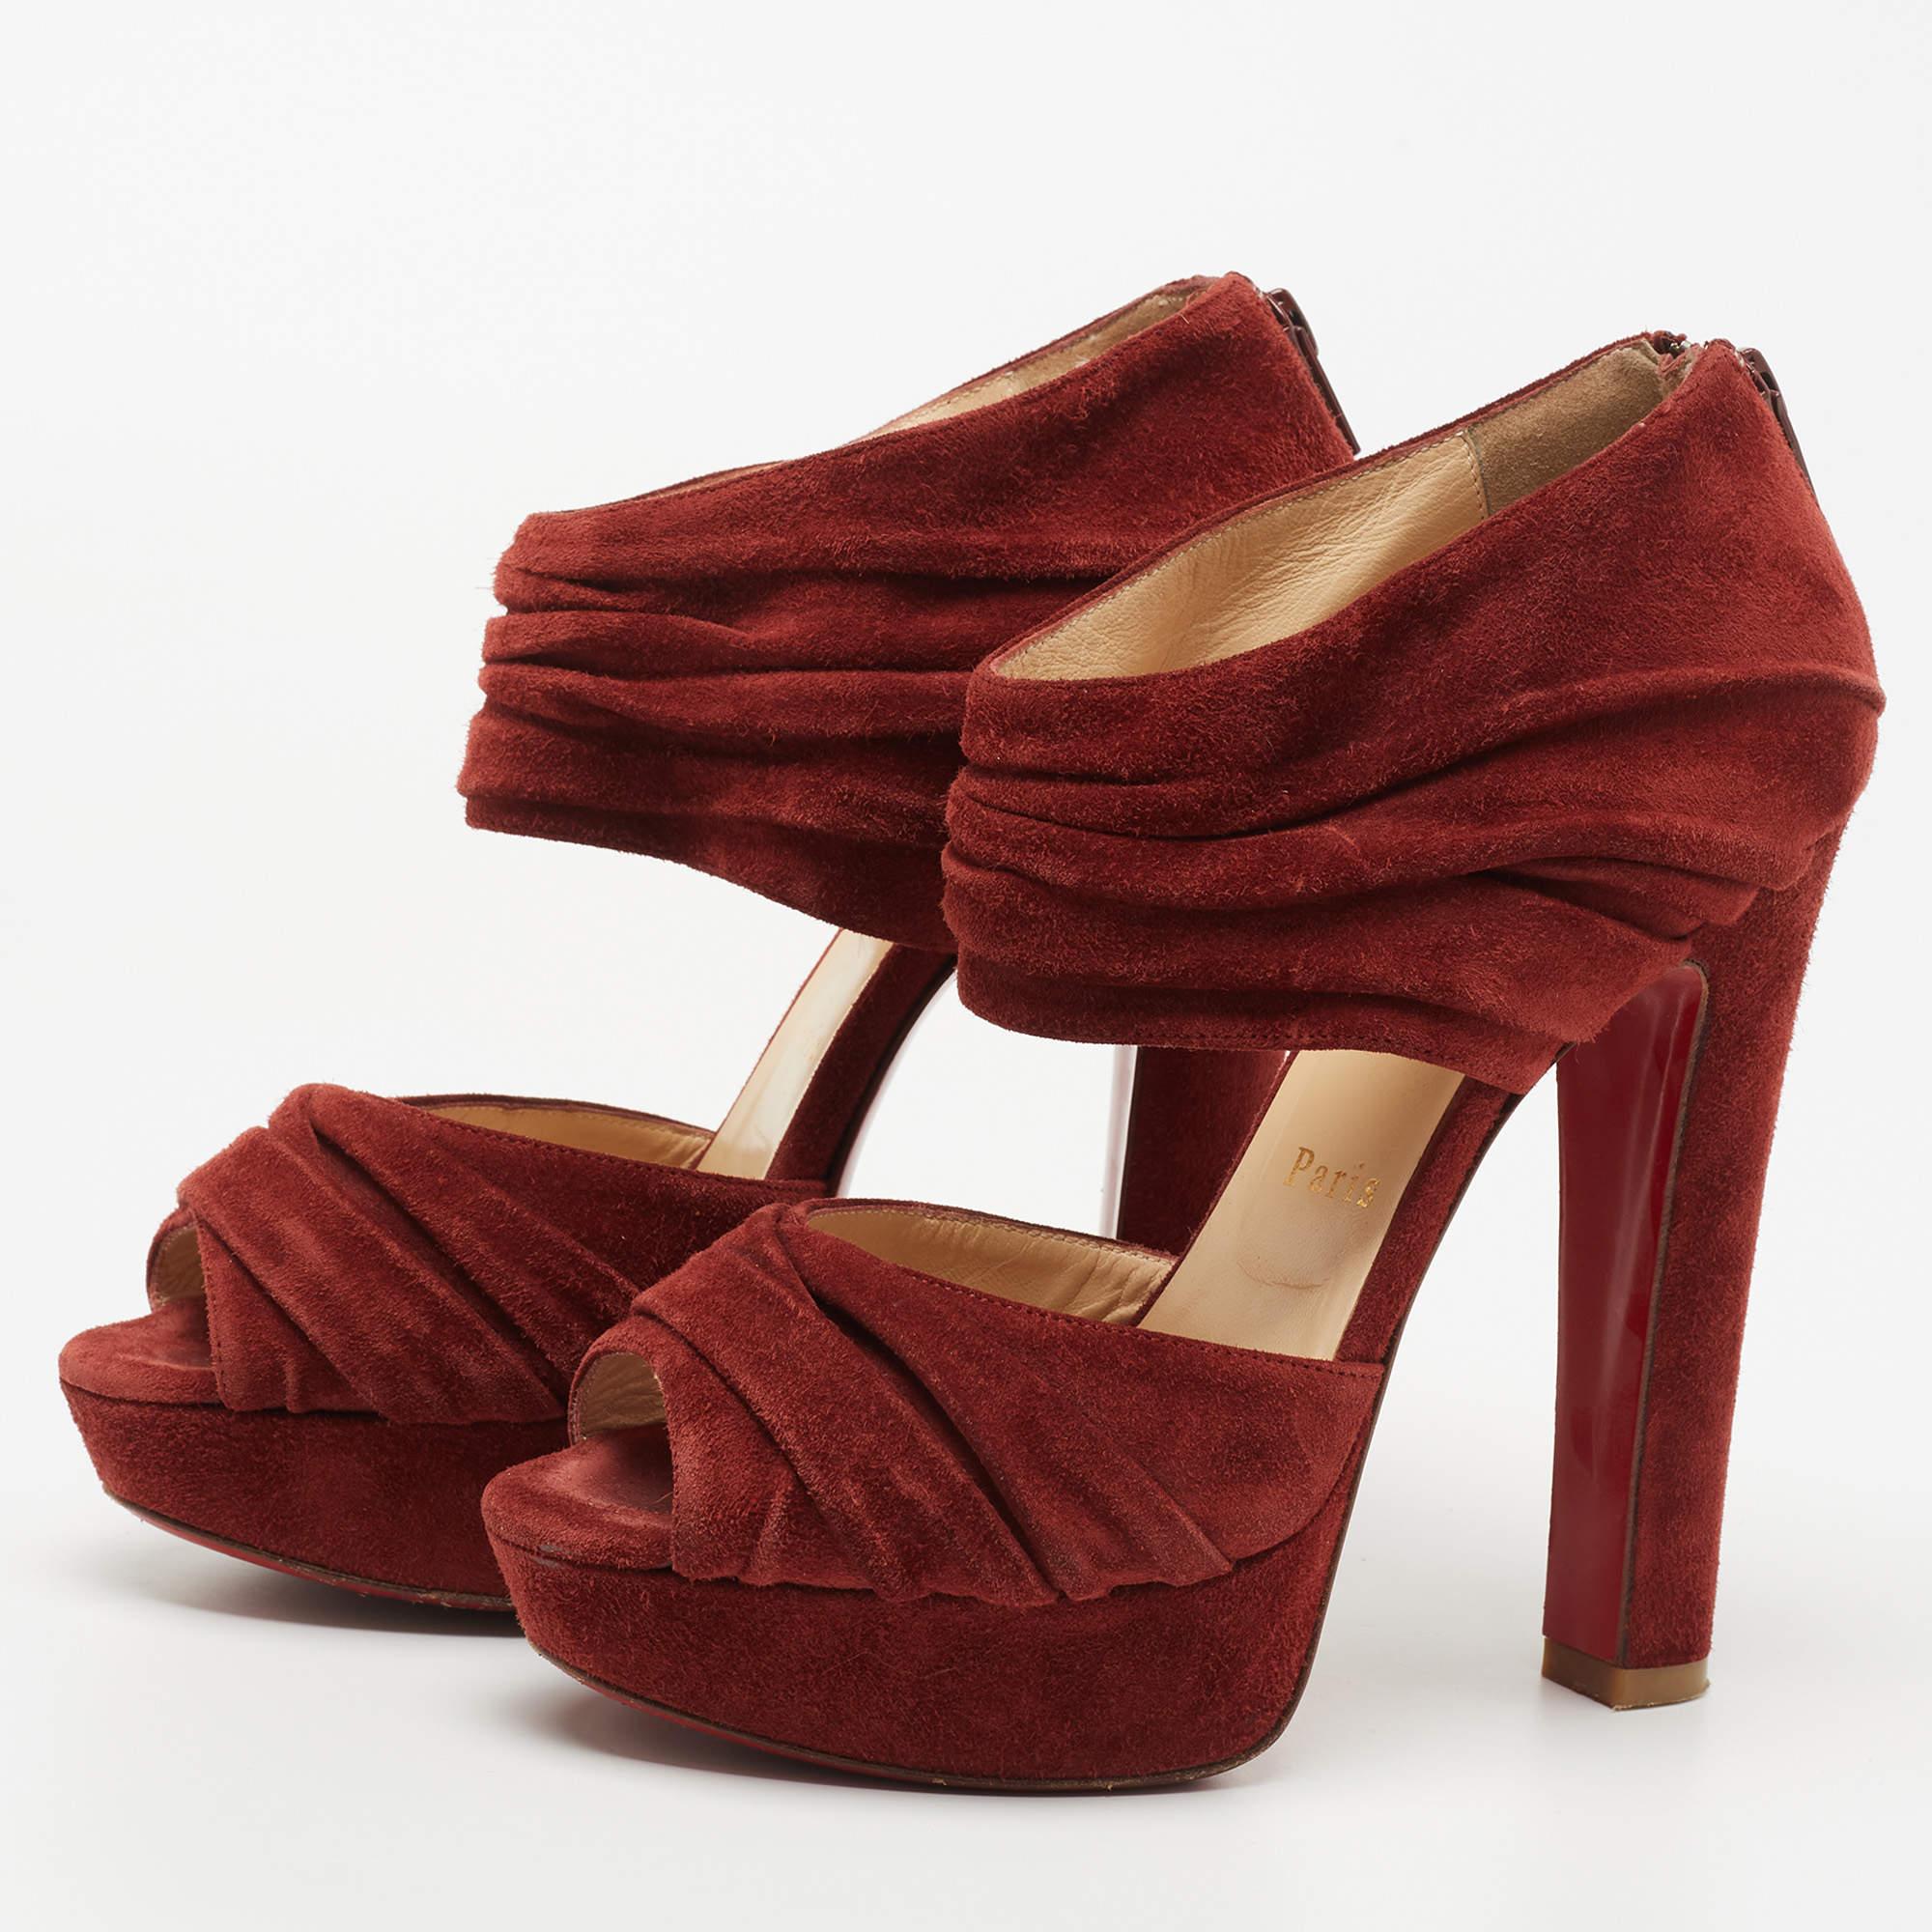 Christian Louboutin Rust Red Suede Pleated Bandra Zip Platform Sandals Size 37 In Good Condition For Sale In Dubai, Al Qouz 2